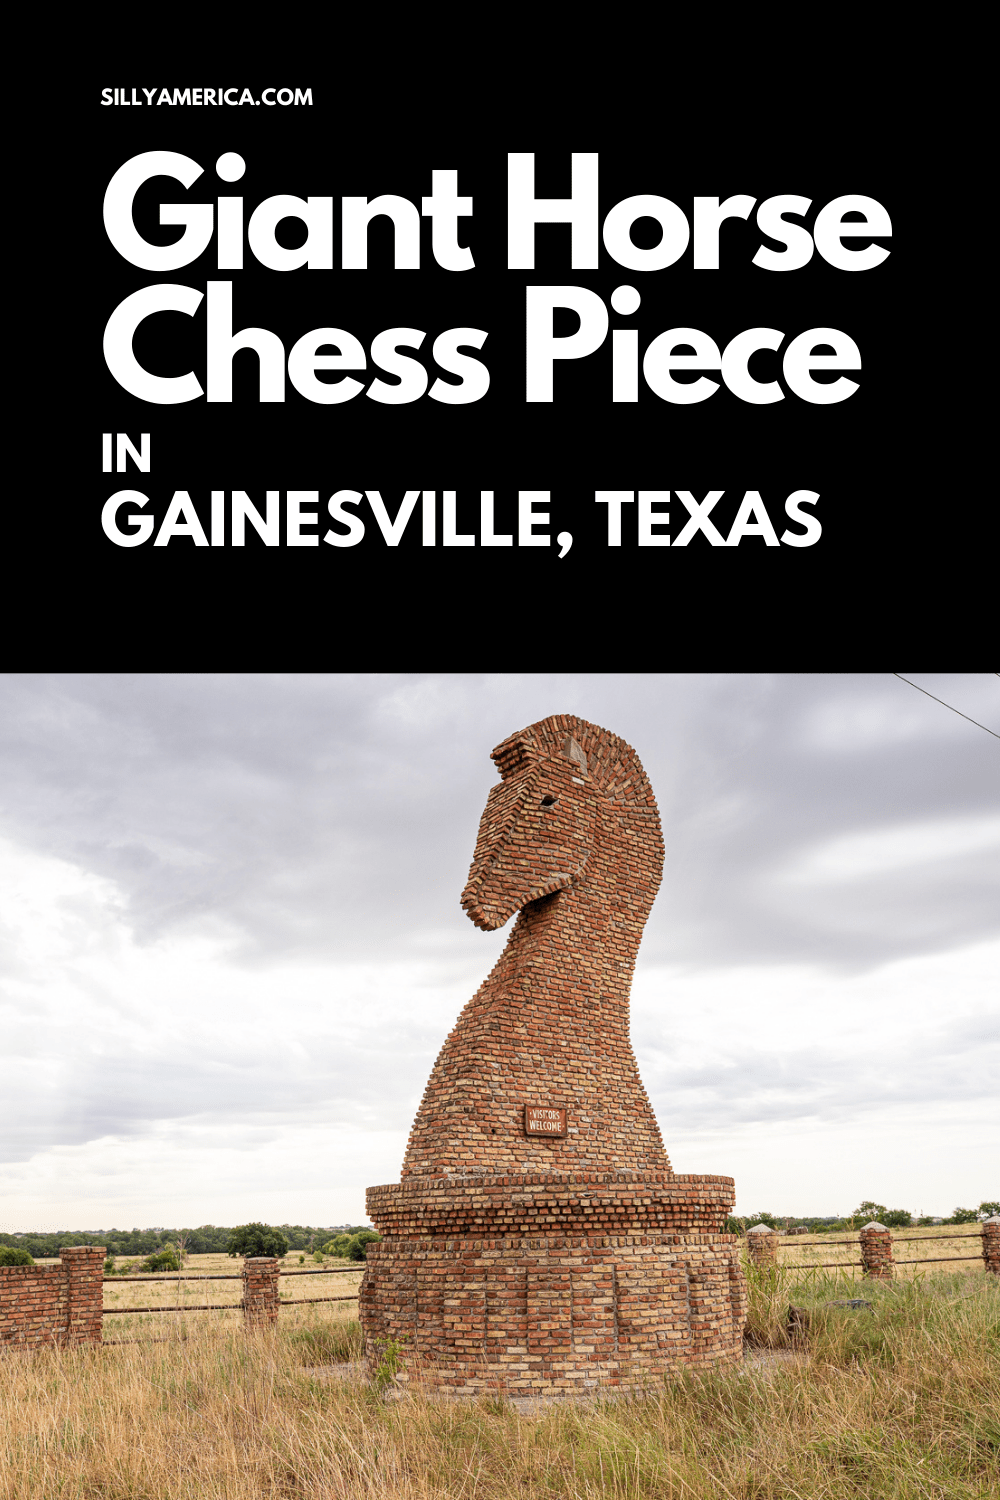 If you've ever driven I-35 between Oklahoma and Texas, you've probably seen this roadside attraction. After all, it is just a pawn meant to lure you off the highway: the Giant Horse Chess Piece in Gainesville, Texas. Visit the Brick Chess Knight roadside attraction on a Texas road trip or day trip from Dallas. #Texas #TexasRoadTrip #RoadTripStop #RoadsideAttraction #RoadsideAttractions #TexasRoadsideAttraction